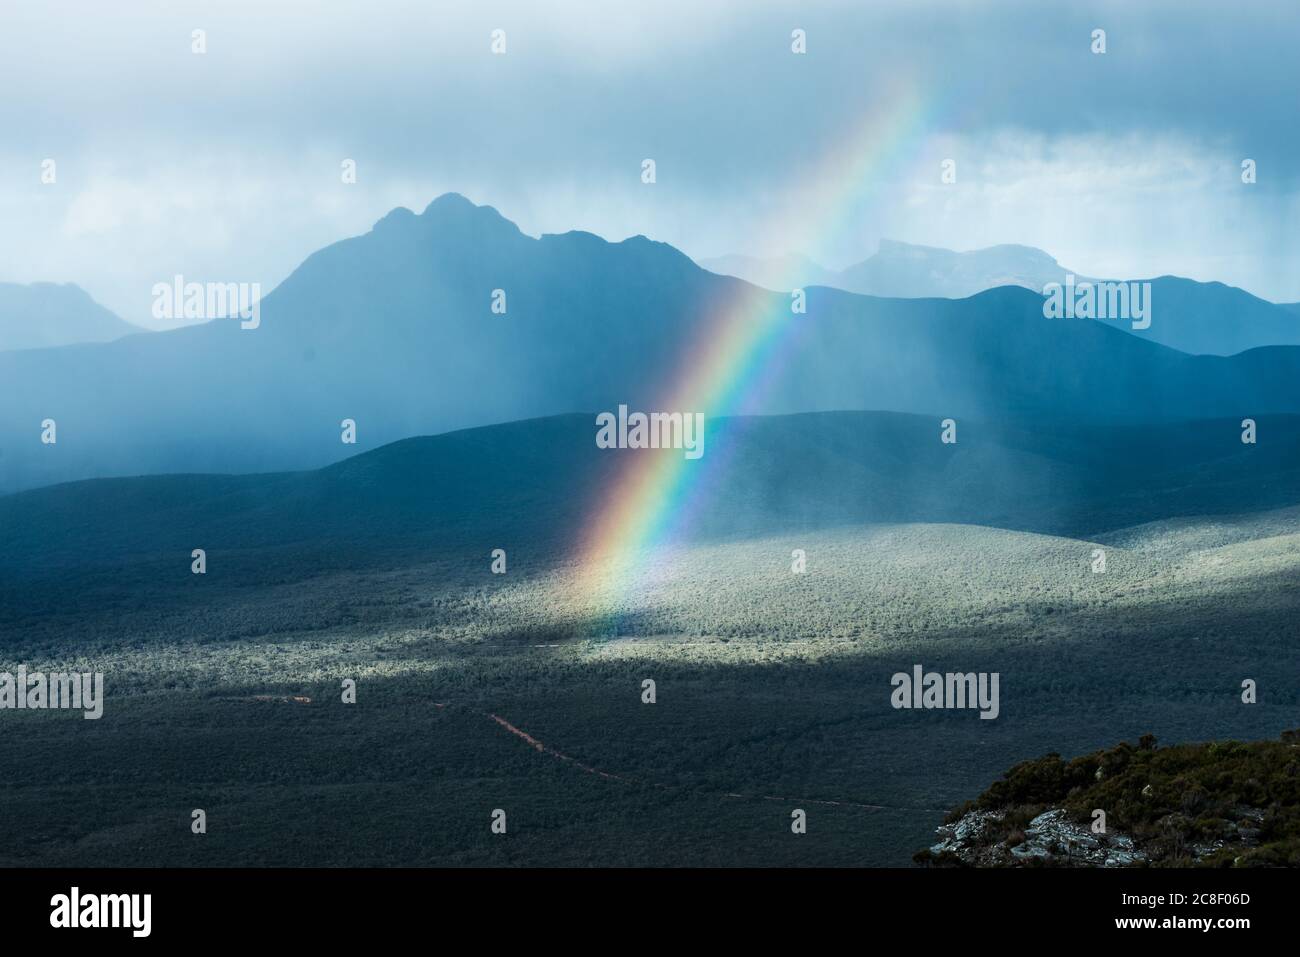 A rainbow in a storm in the Stirling range mountains, Western Australia Stock Photo